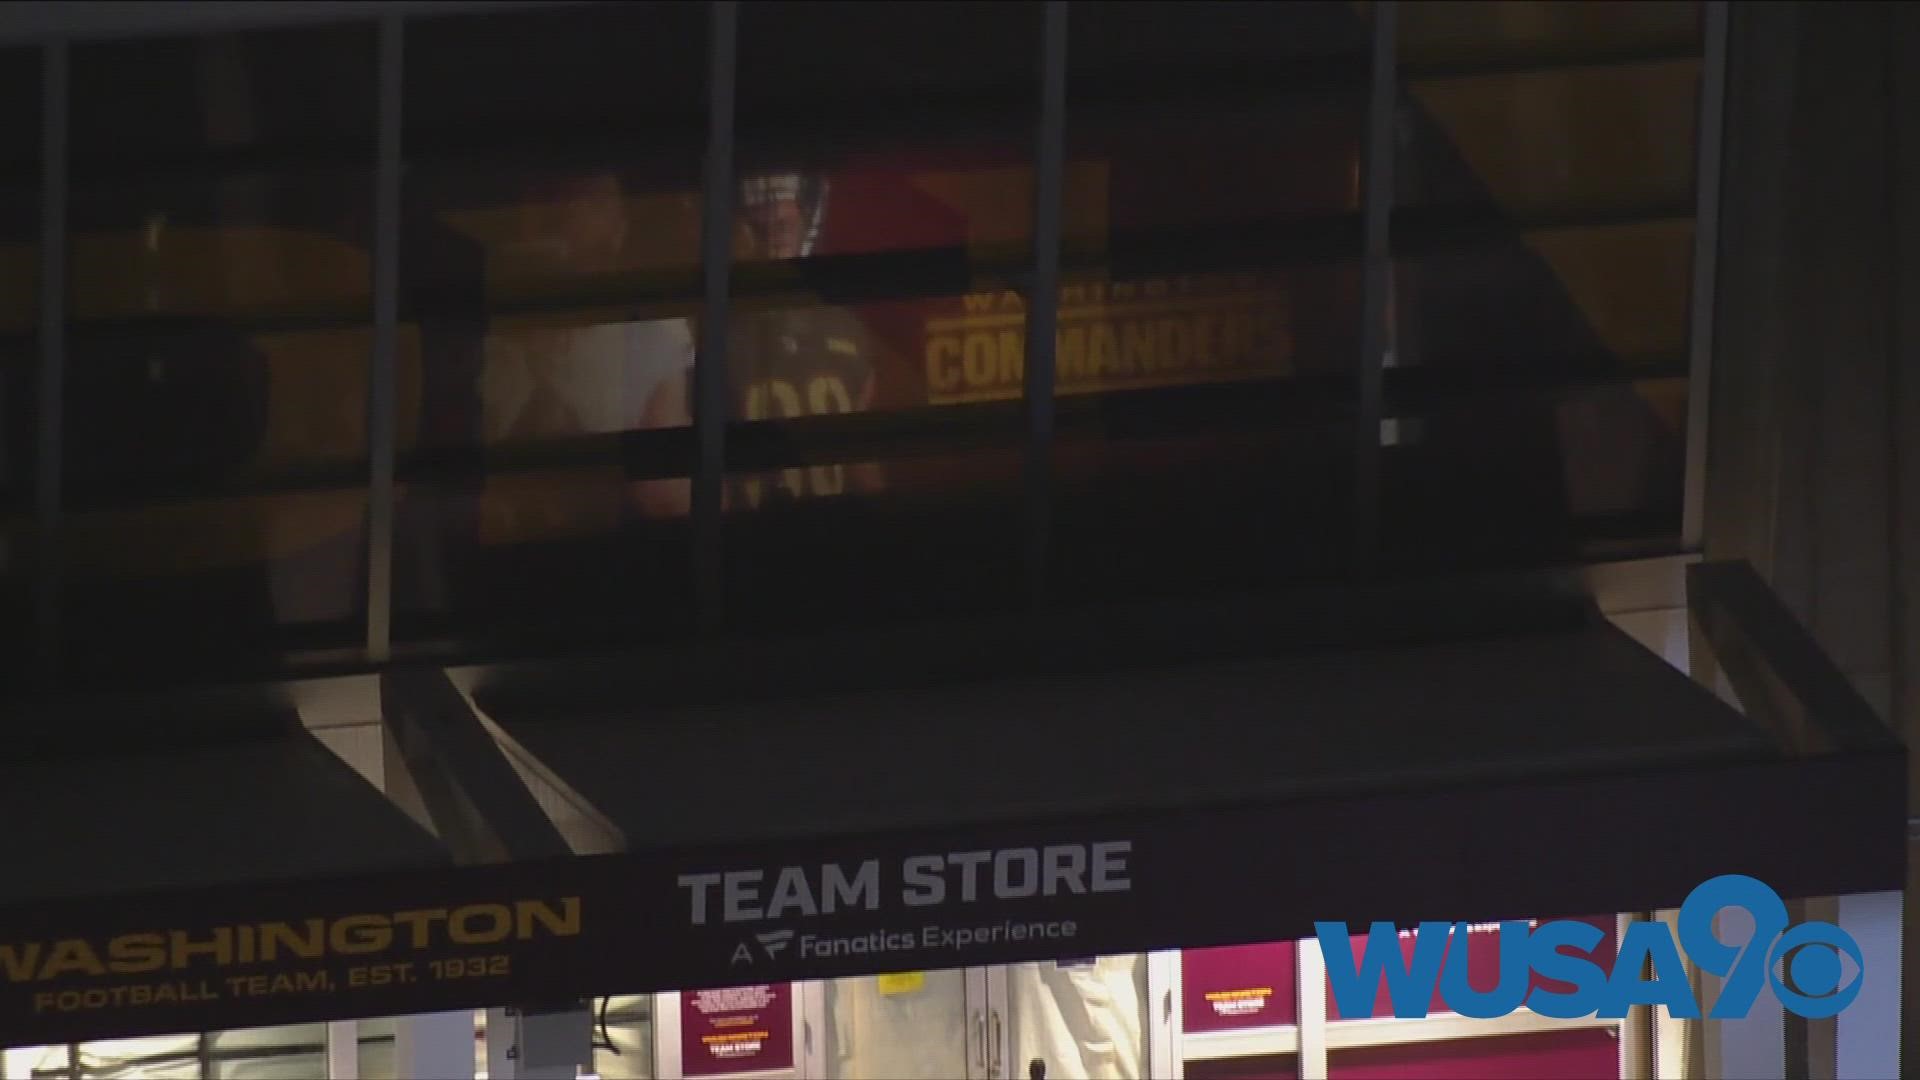 The Washington Football Team will announce the new name on Feb. 2nd at FedEx field